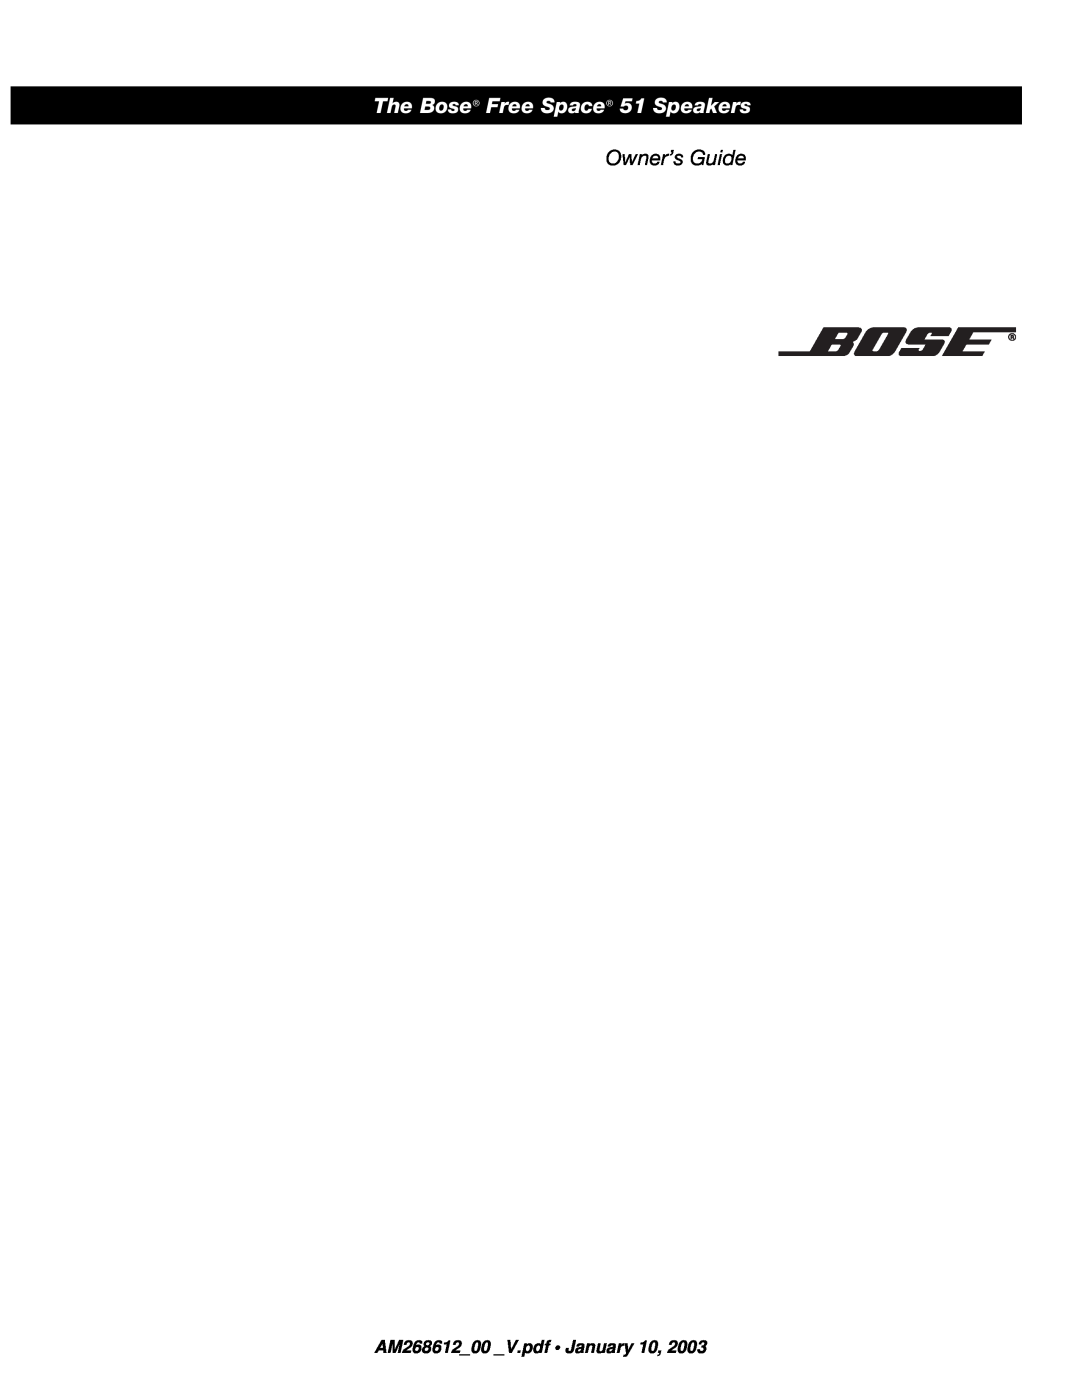 Bose am268612_00_v manual The Bose Free Space 51 Speakers, Owner’s Guide 